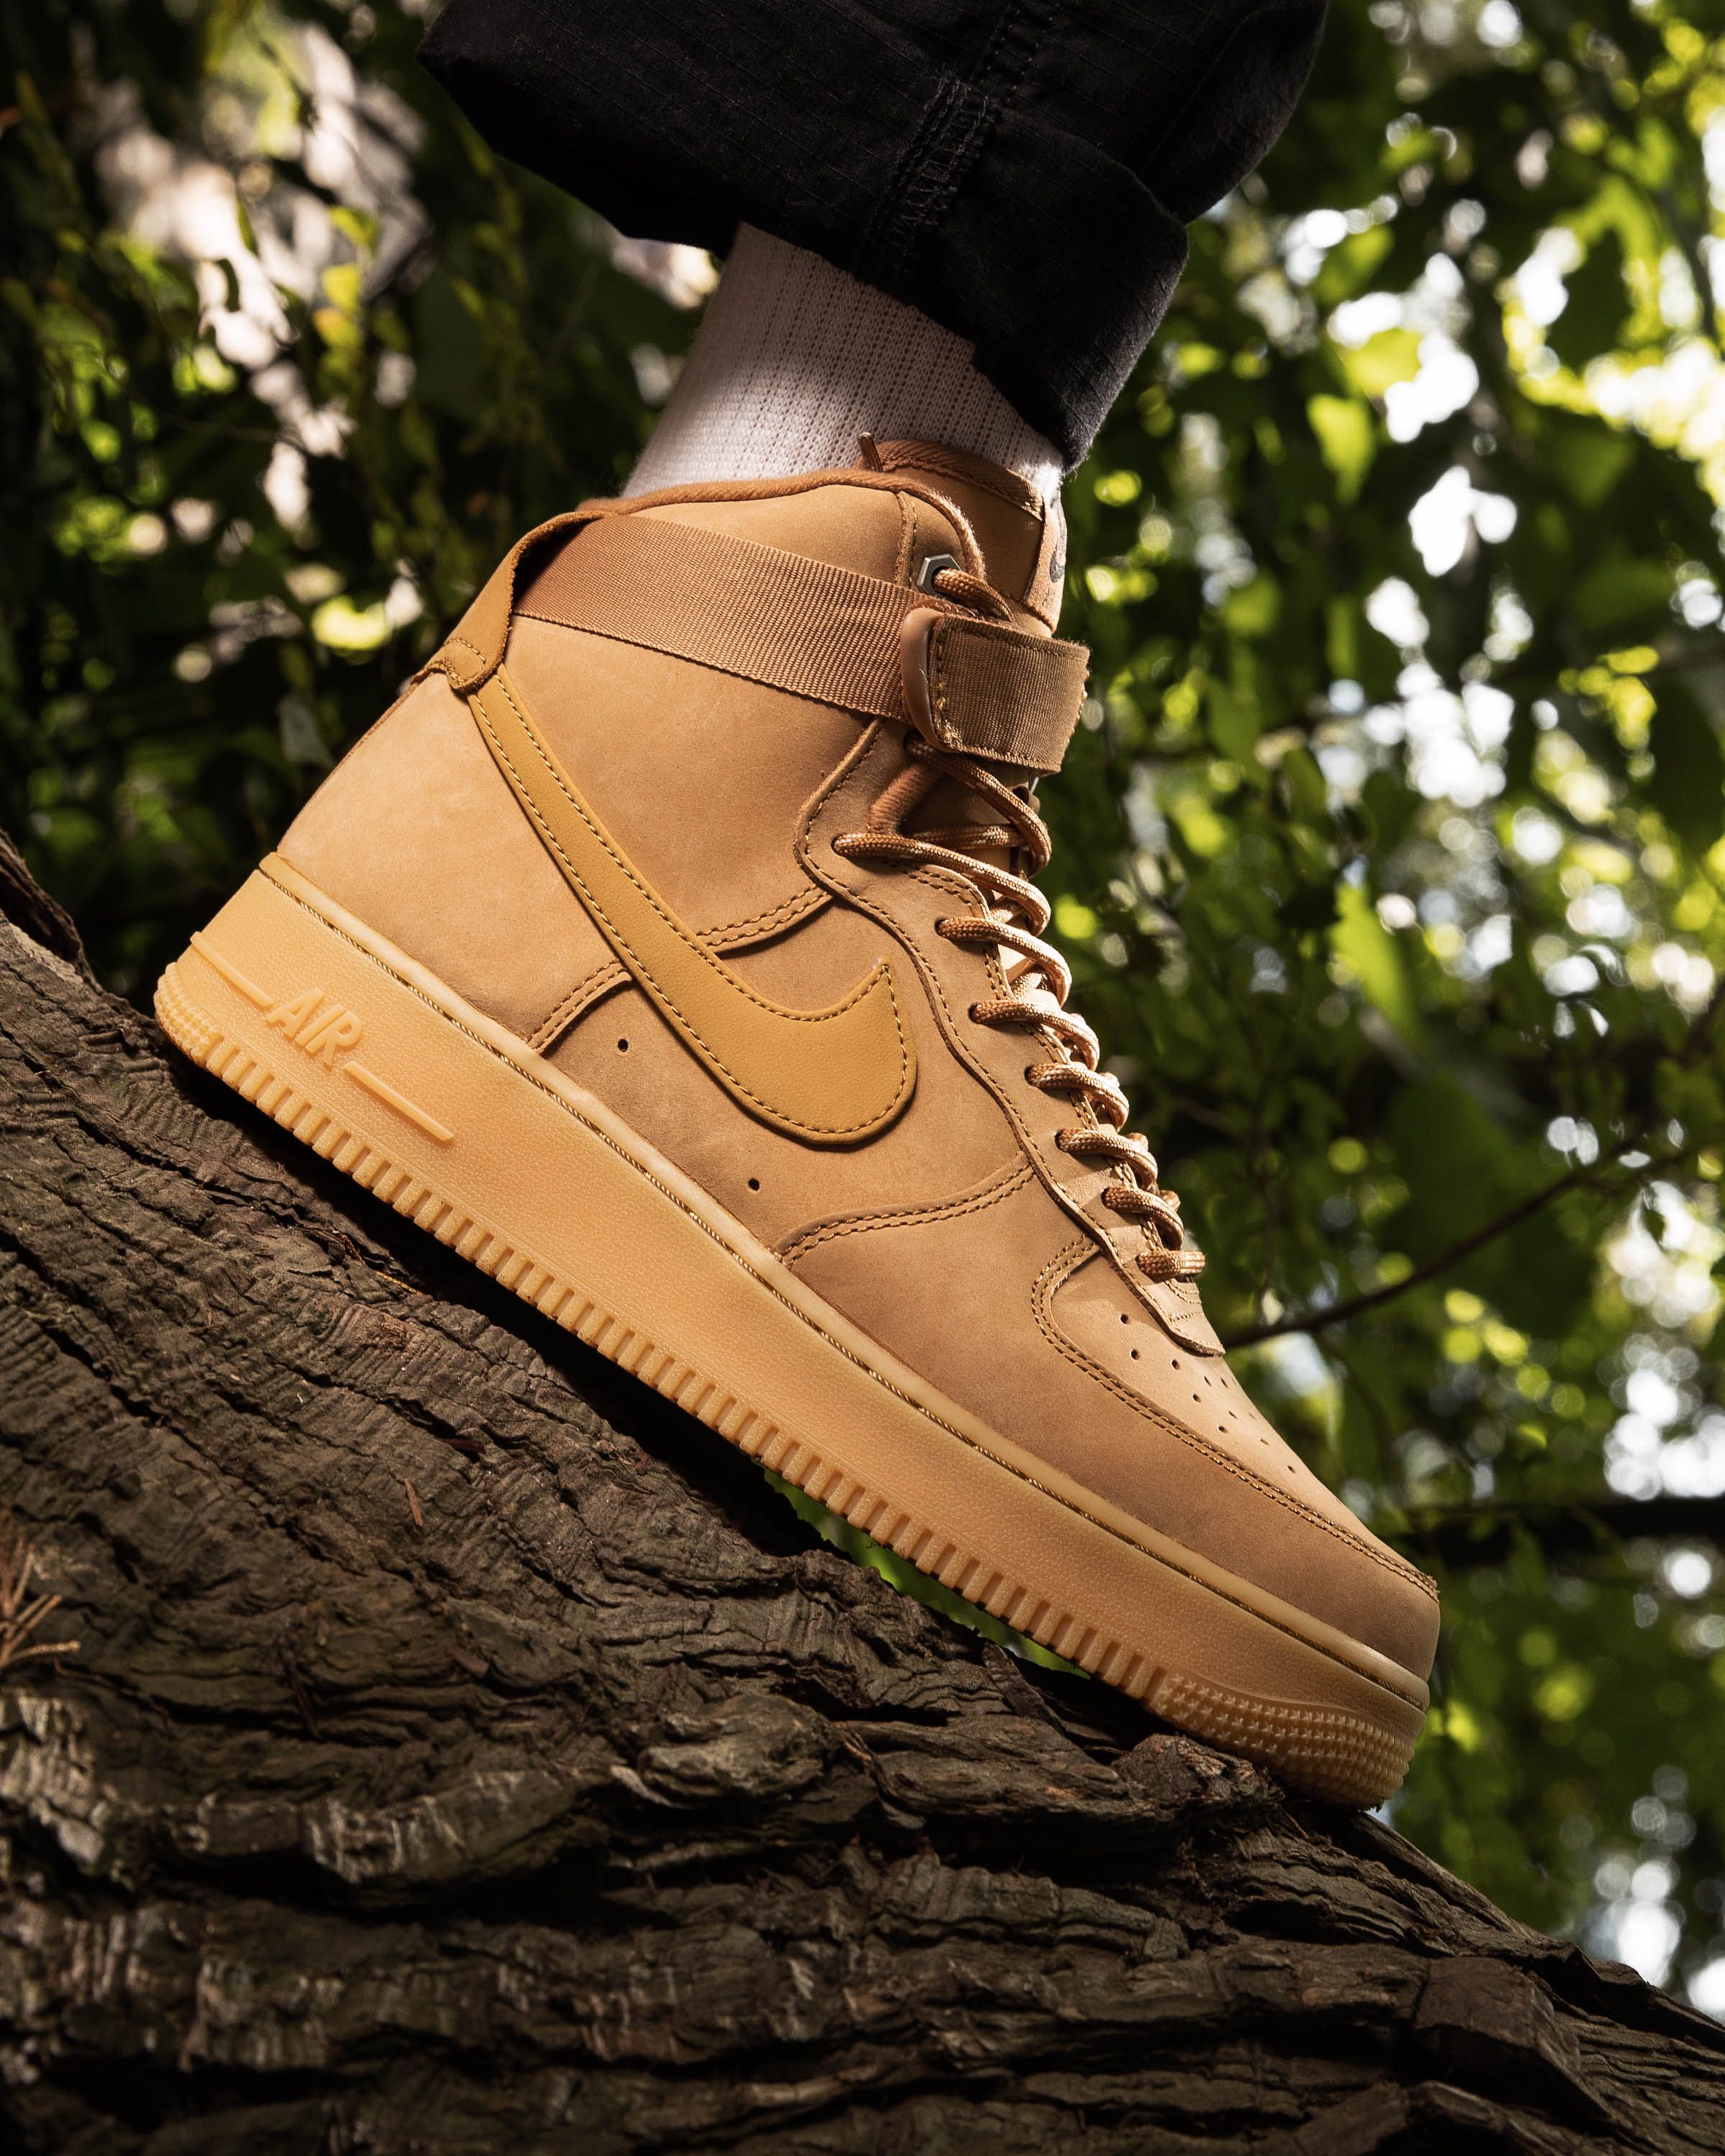 Psychiatry Lying construction Titolo on Twitter: "enjoying warm autumn days with the Nike Air Force 1  High "Wheat" 🍂🍃 check it out ➡️ https://t.co/84uHz8JlNi US 7 (40) - US 12  (46) style code 🔎 CJ9178-200 #